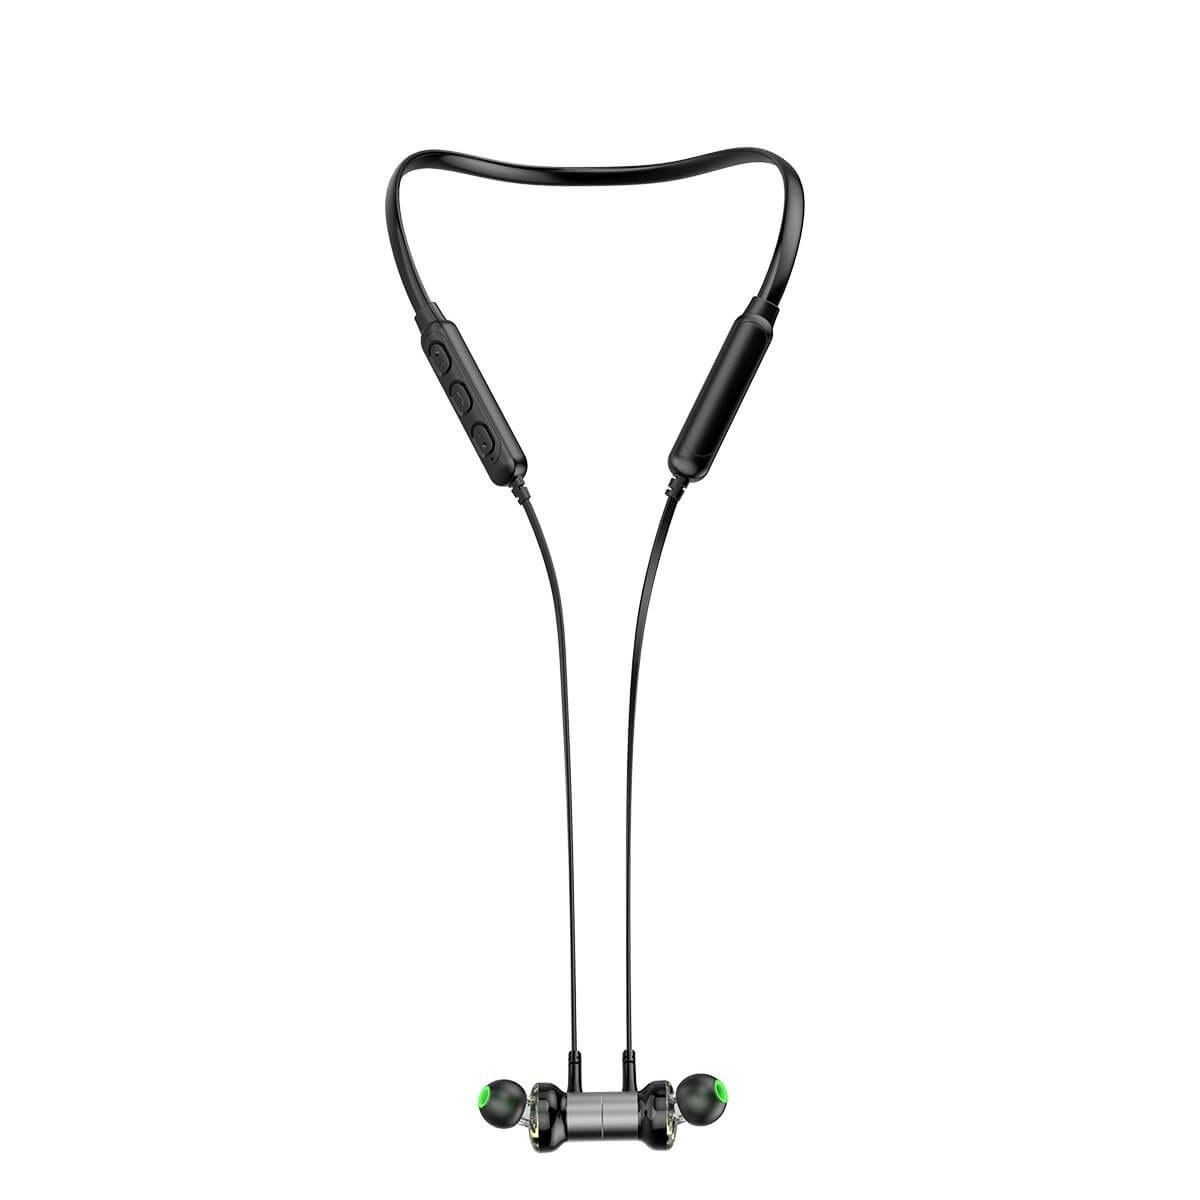 Fuel Up Your Workouts With Dual Dynamic And Balanced Armature Driver Bluetooth Sport Earphones